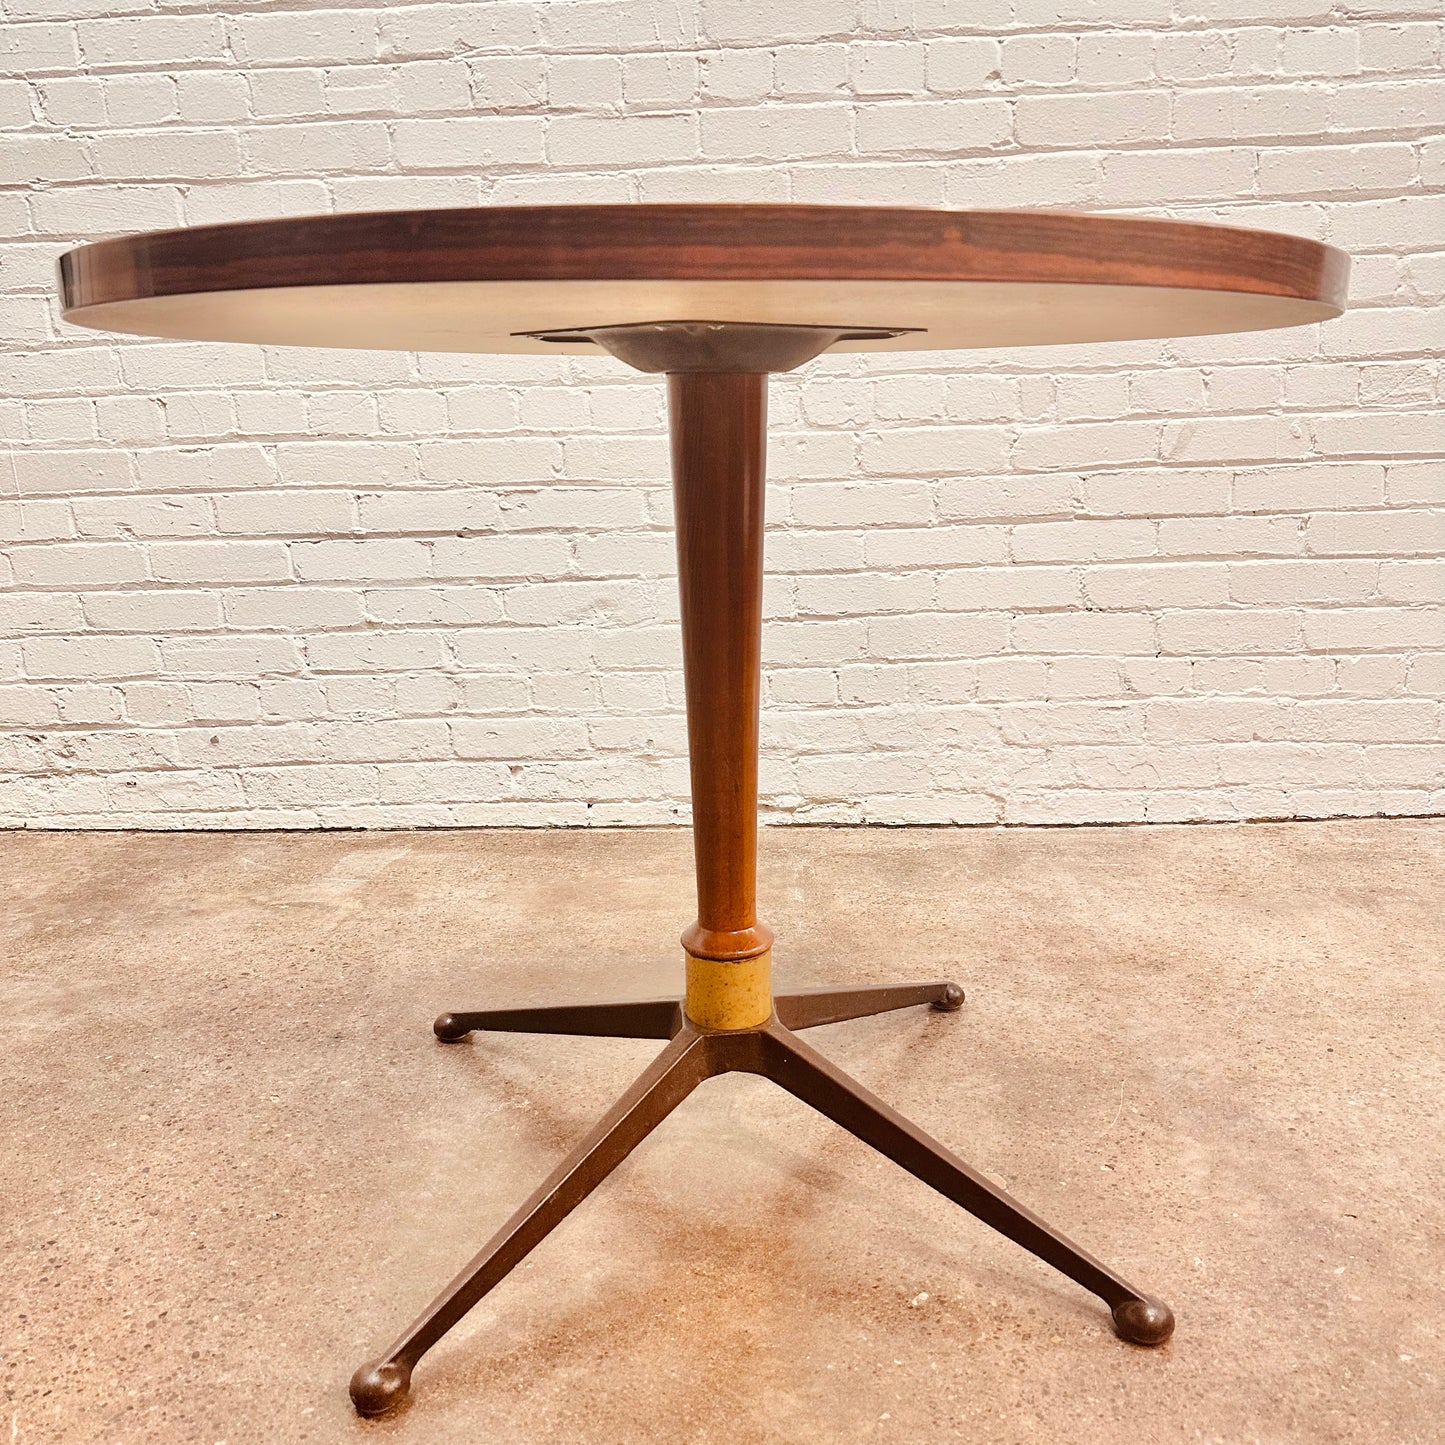 36” ROUND FAUX BOIS ROSEWOOD CAFE TABLE WITH STEEL LEGS